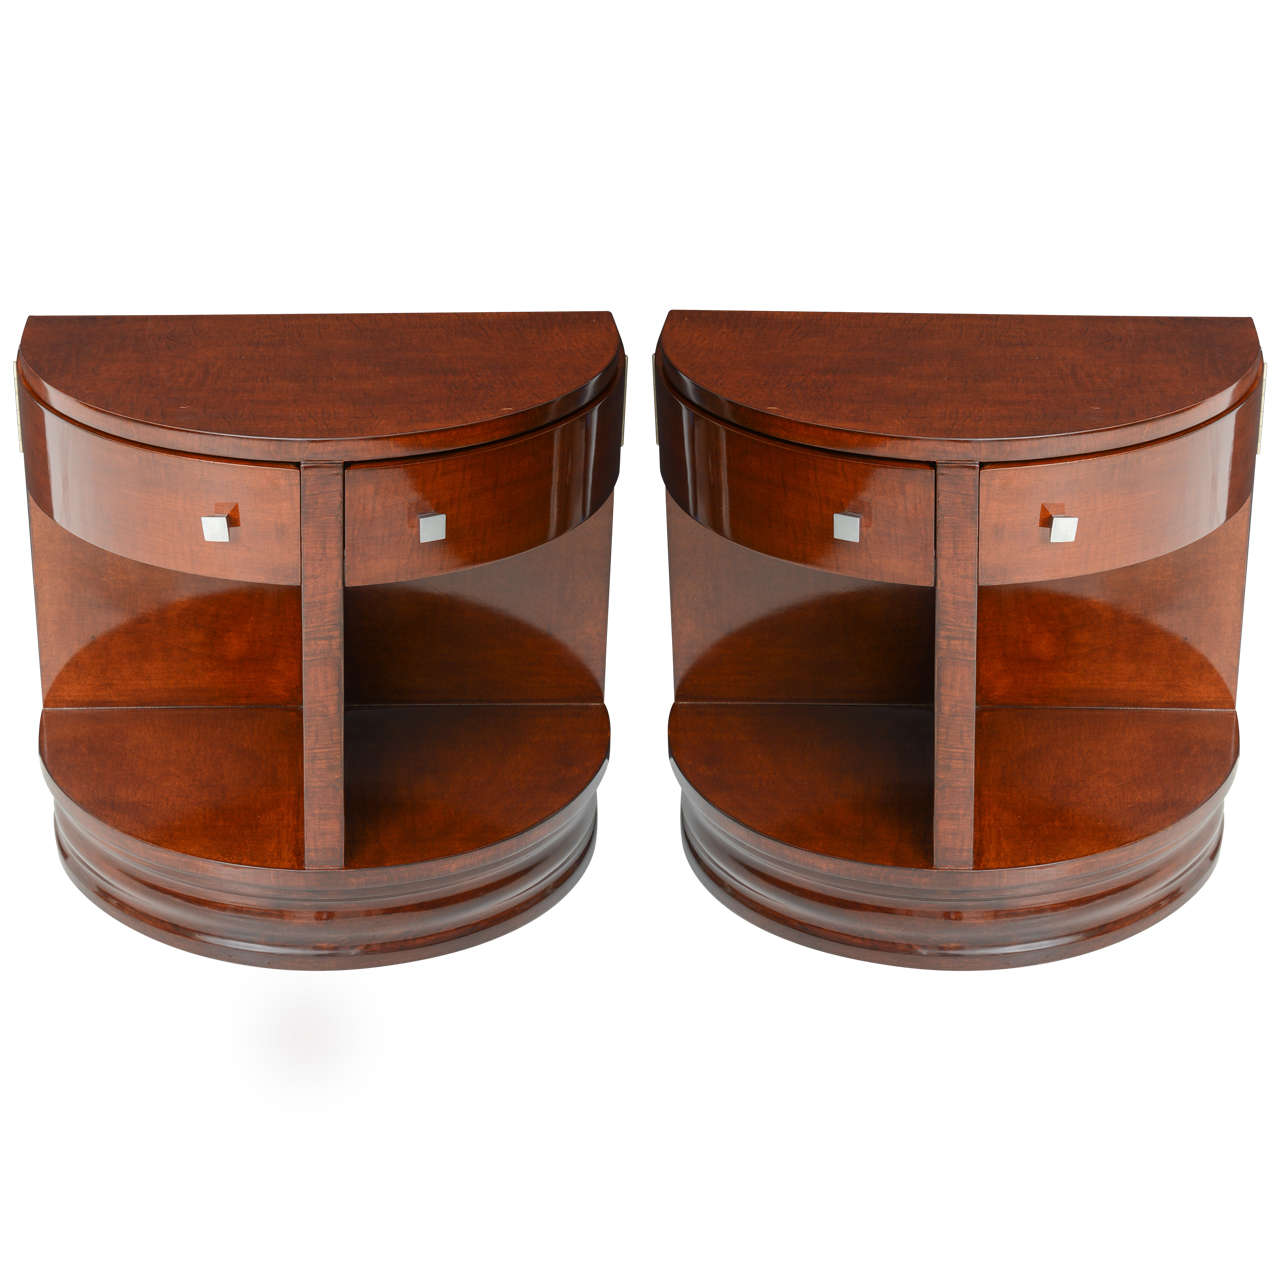 Pair of American Art Deco Style Demilune Side Tables by Widdicomb Furniture